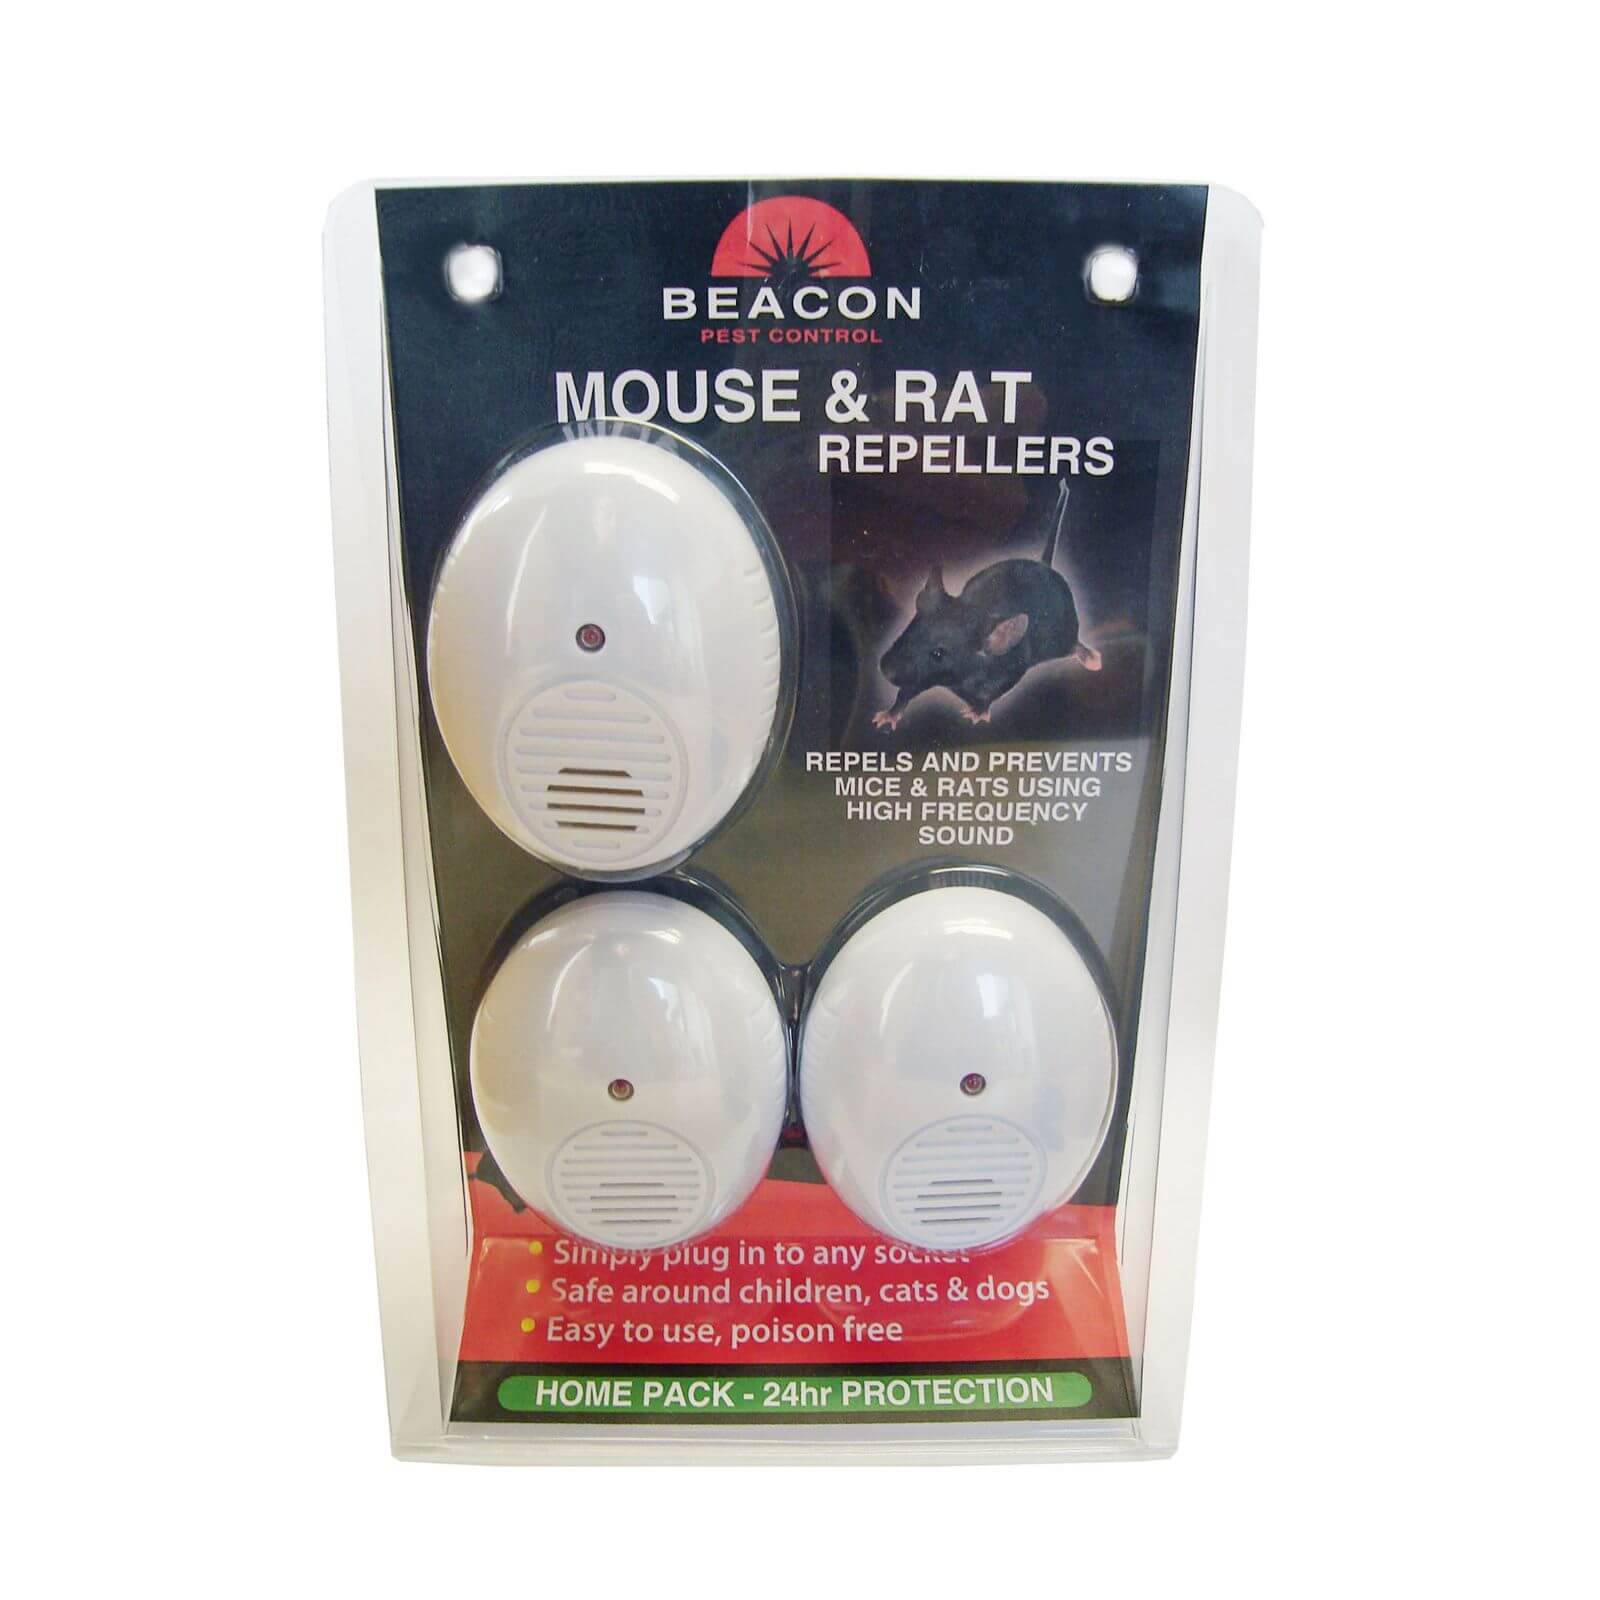 Beacon Mouse and Rat Repeller - 46m2 range (Pack of 3)